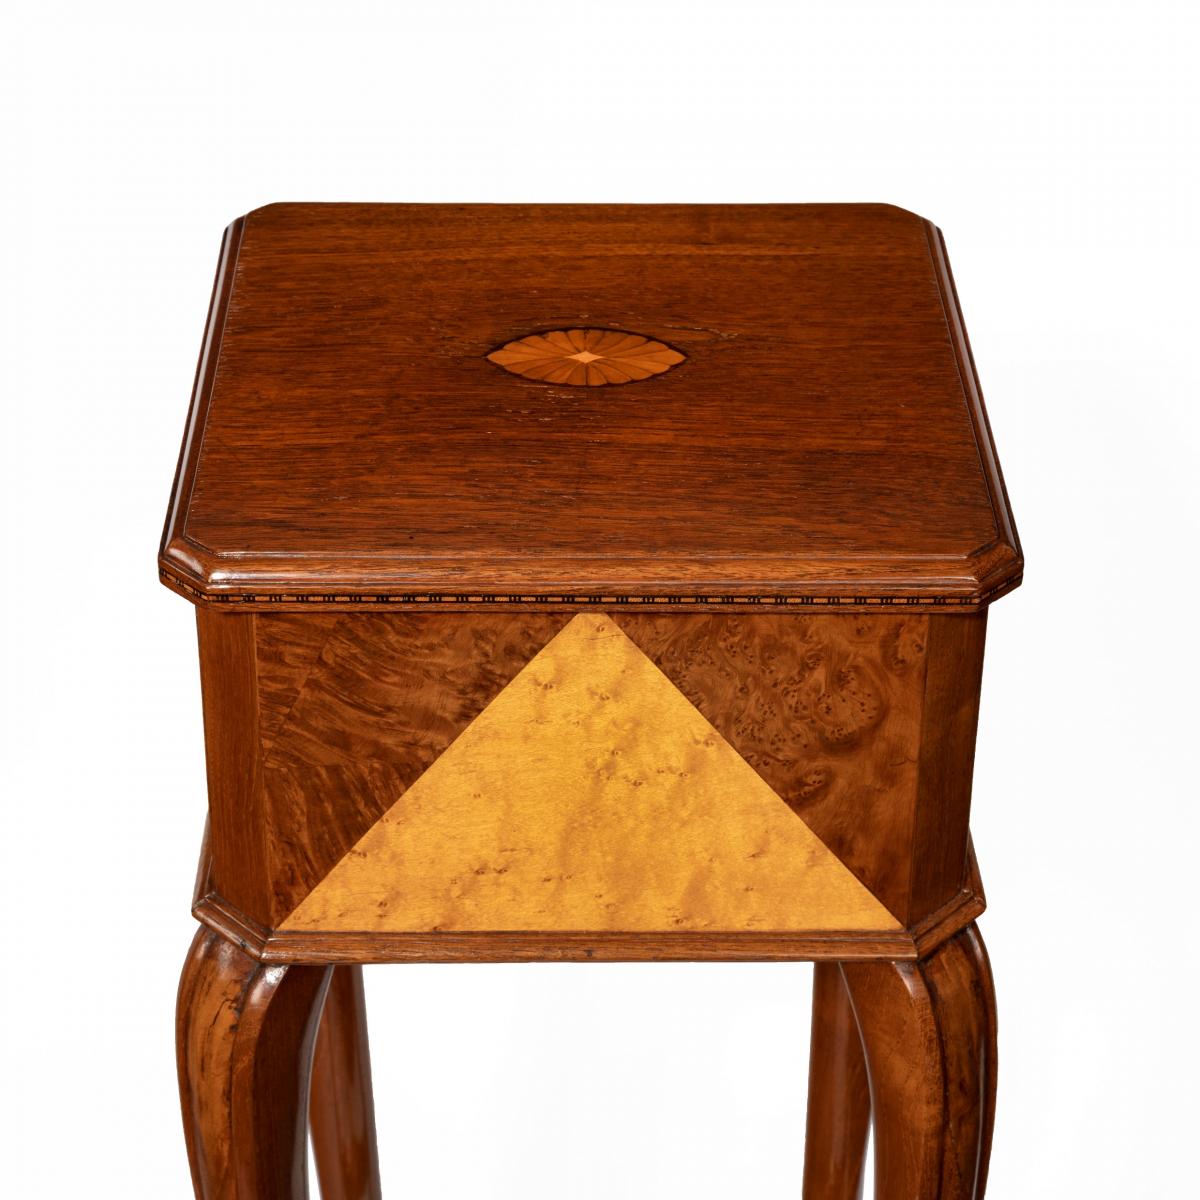 Anglo-Indian teak stands